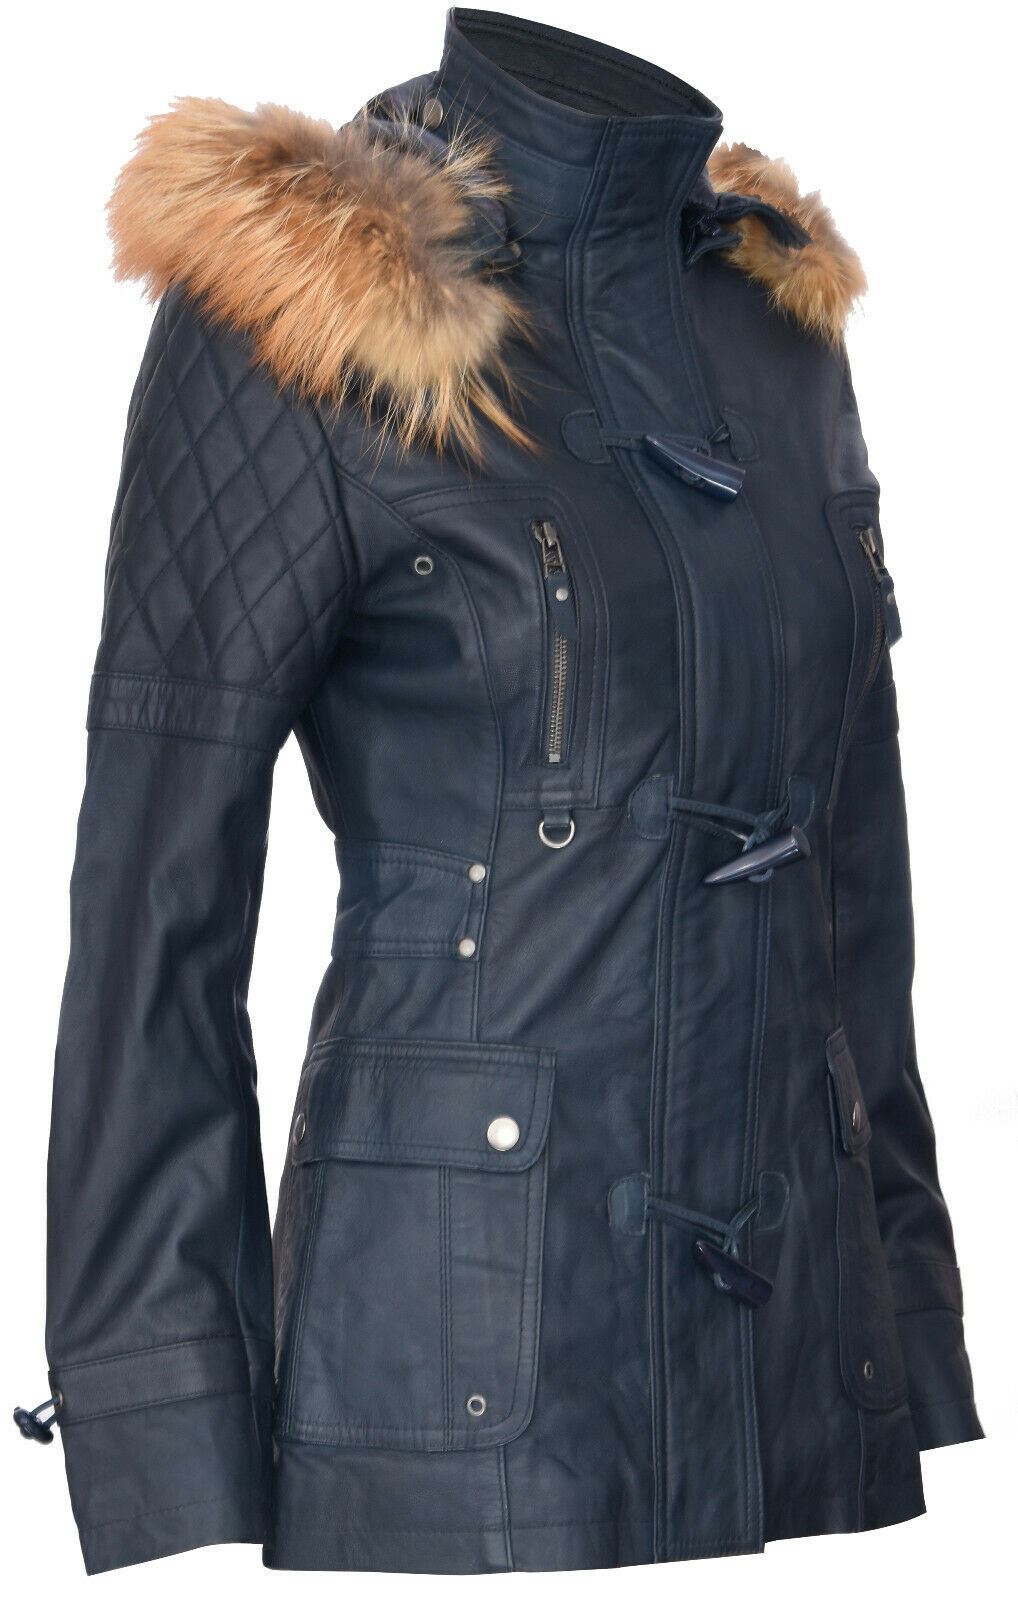 Womens Quilted Leather Hooded Parka Jacket-Northampton - Upperclass Fashions 